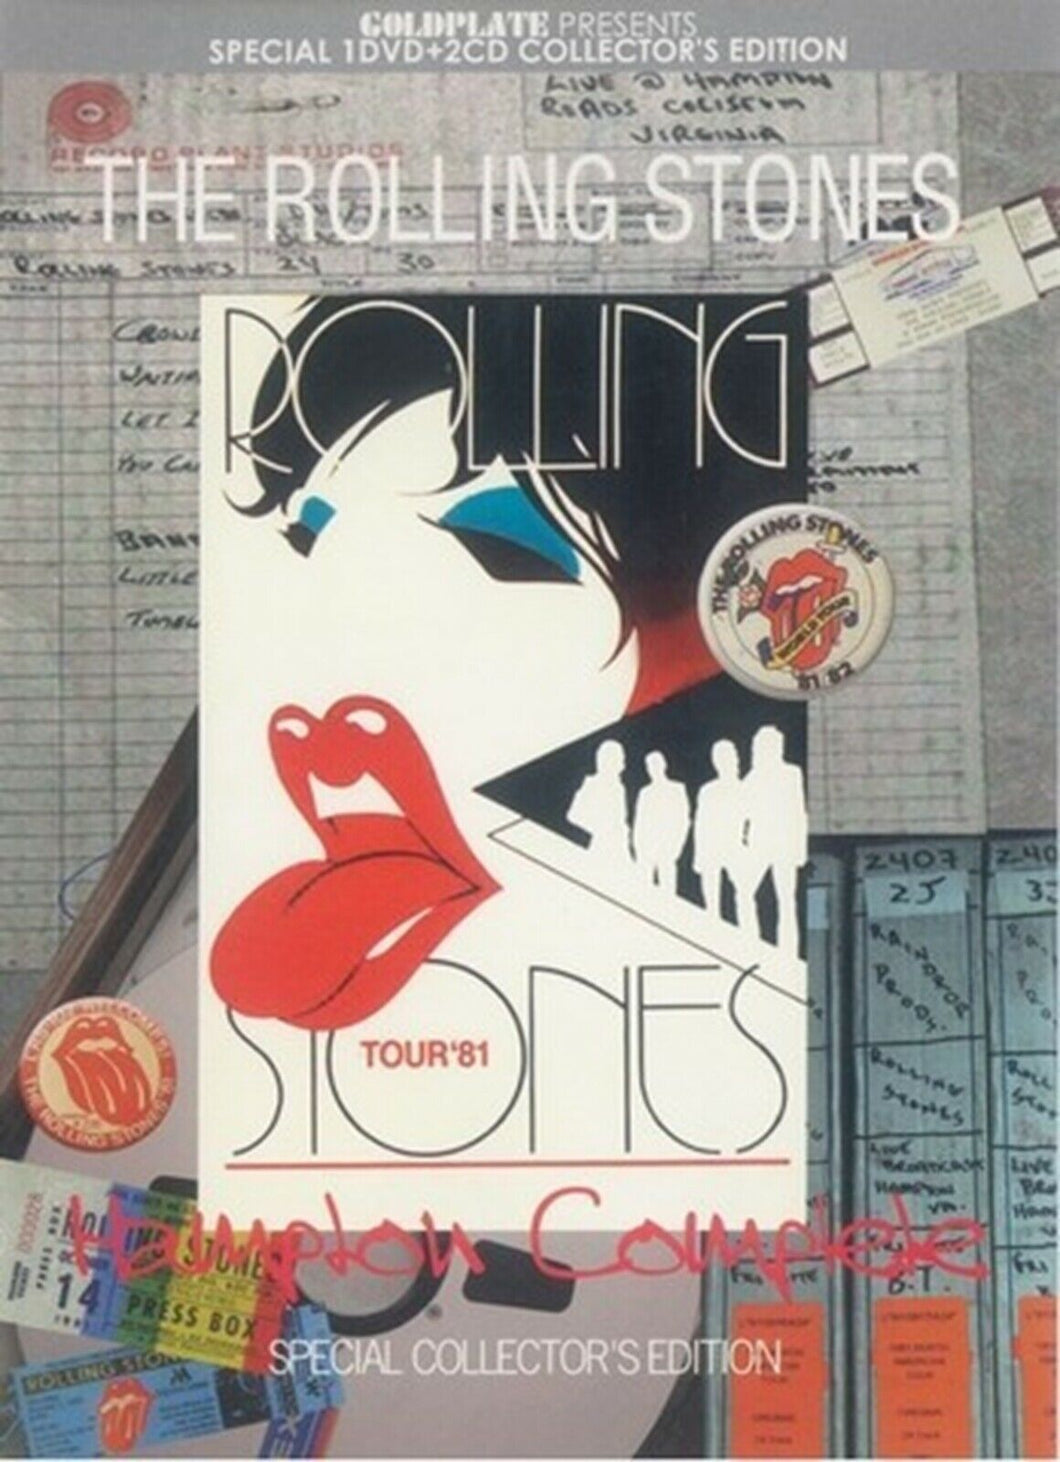 The Rolling Stones Hampton Complete 1982 Collector's Edition 2 CD 1 DVD Case Set